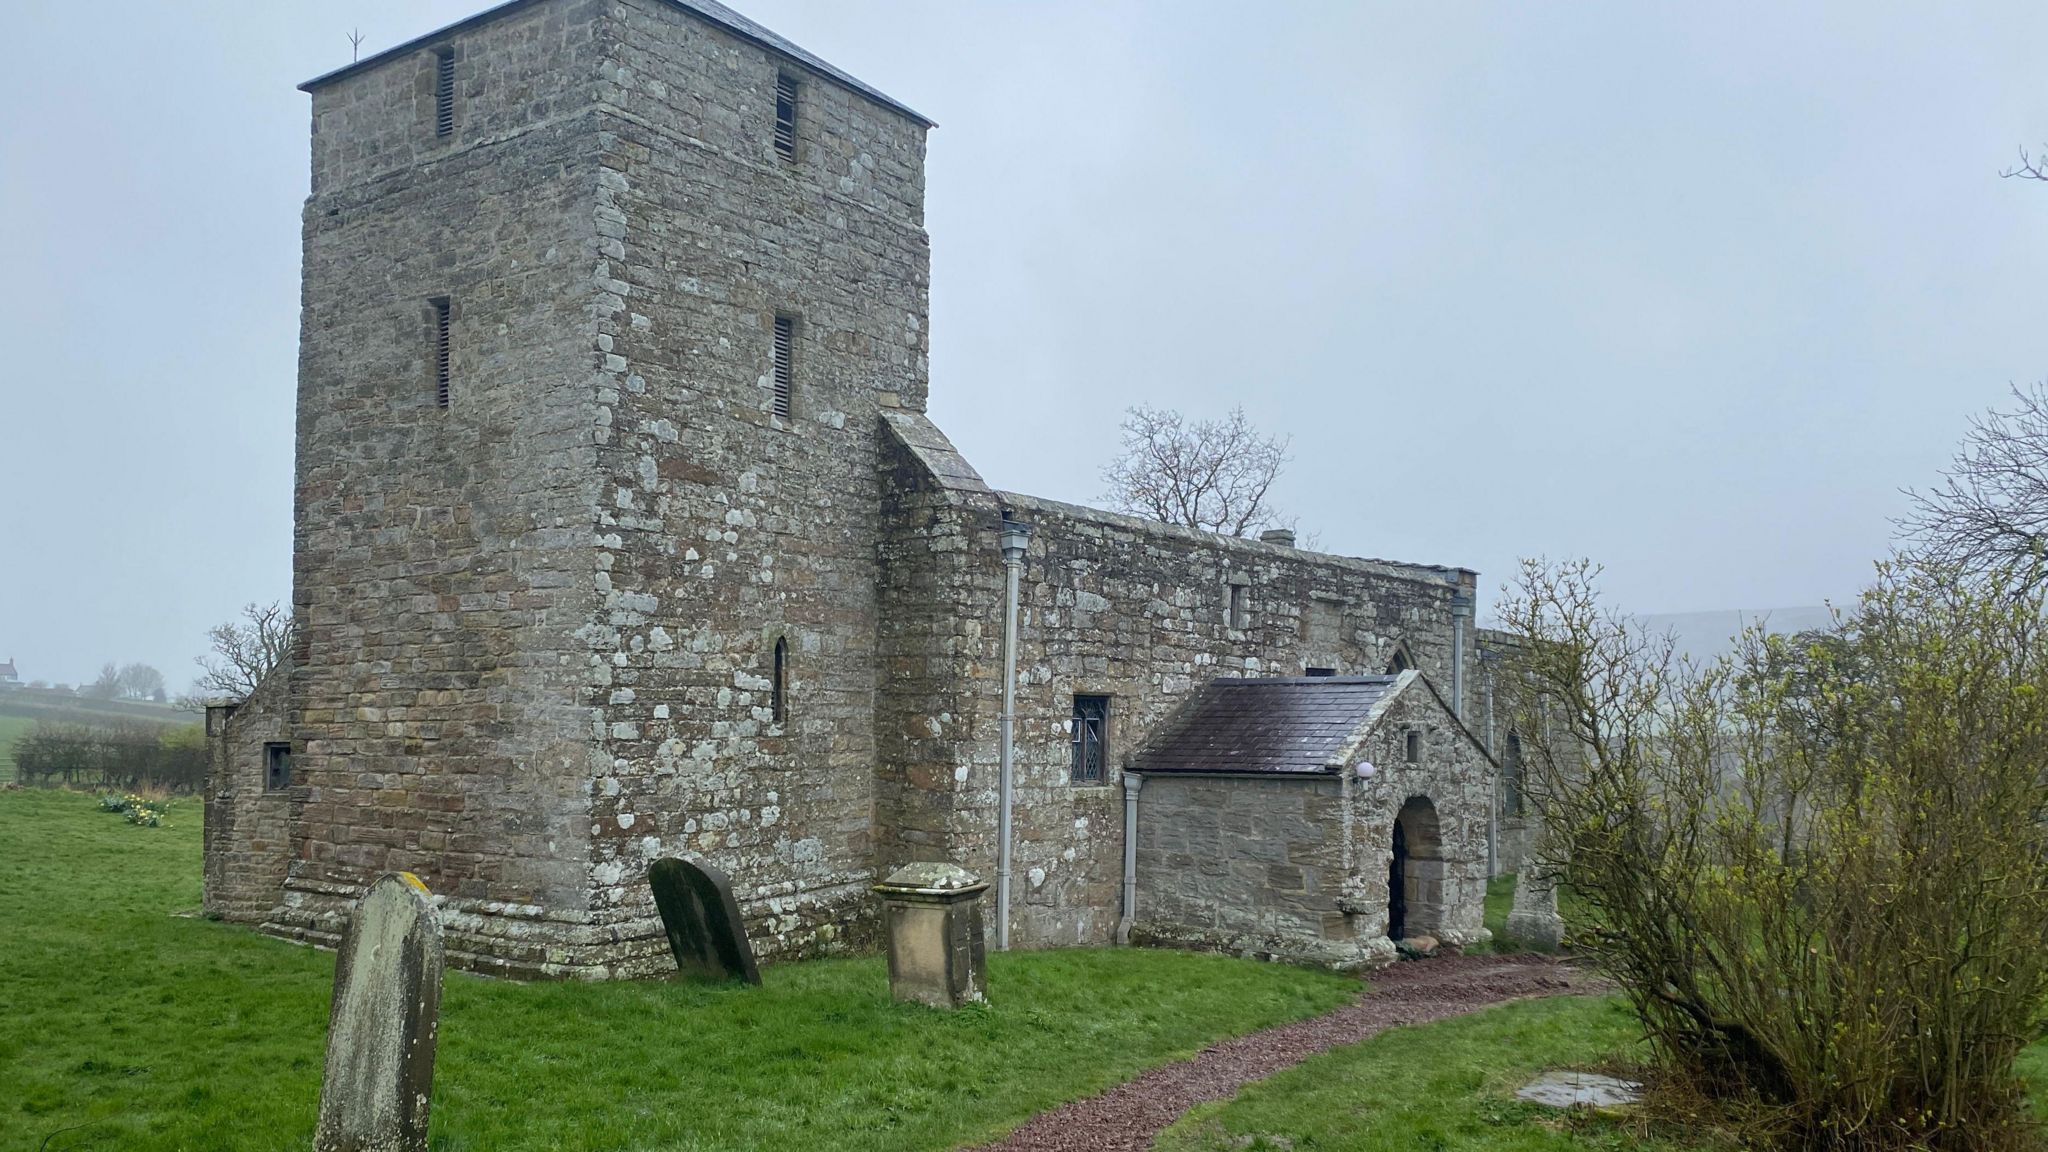 An 11th century small church with a squat Norman tower